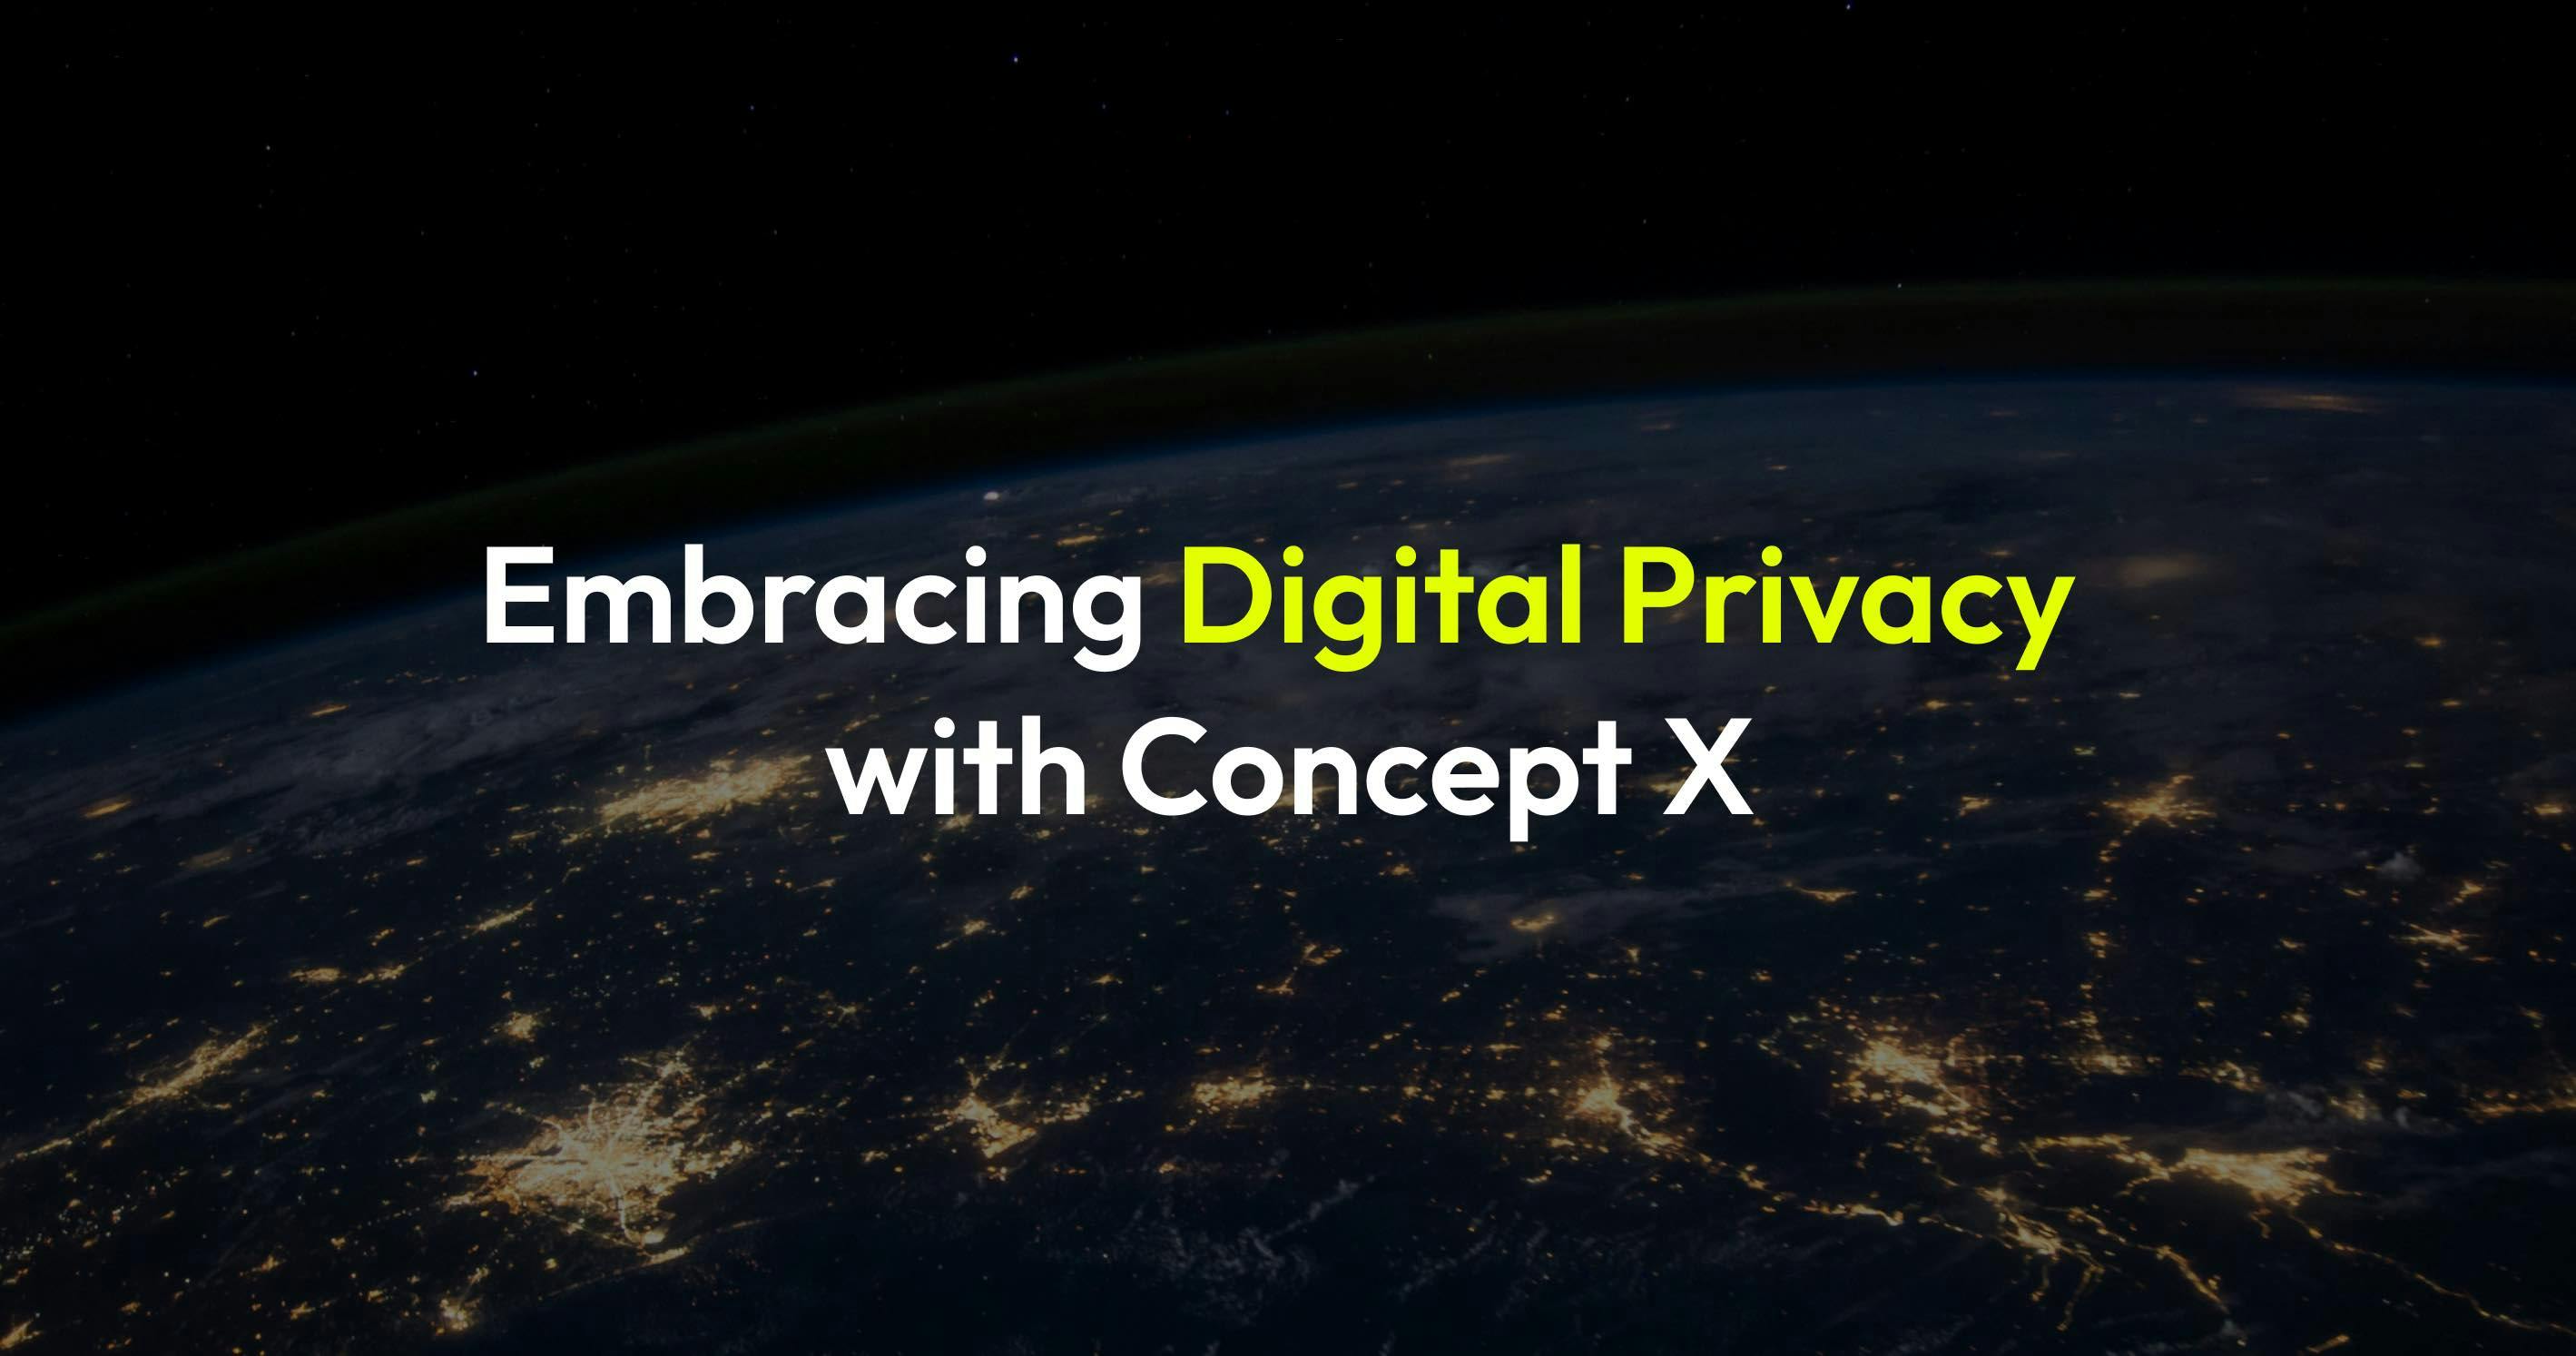 An image for a blog post titled Embracing Digital Privacy with Concept X